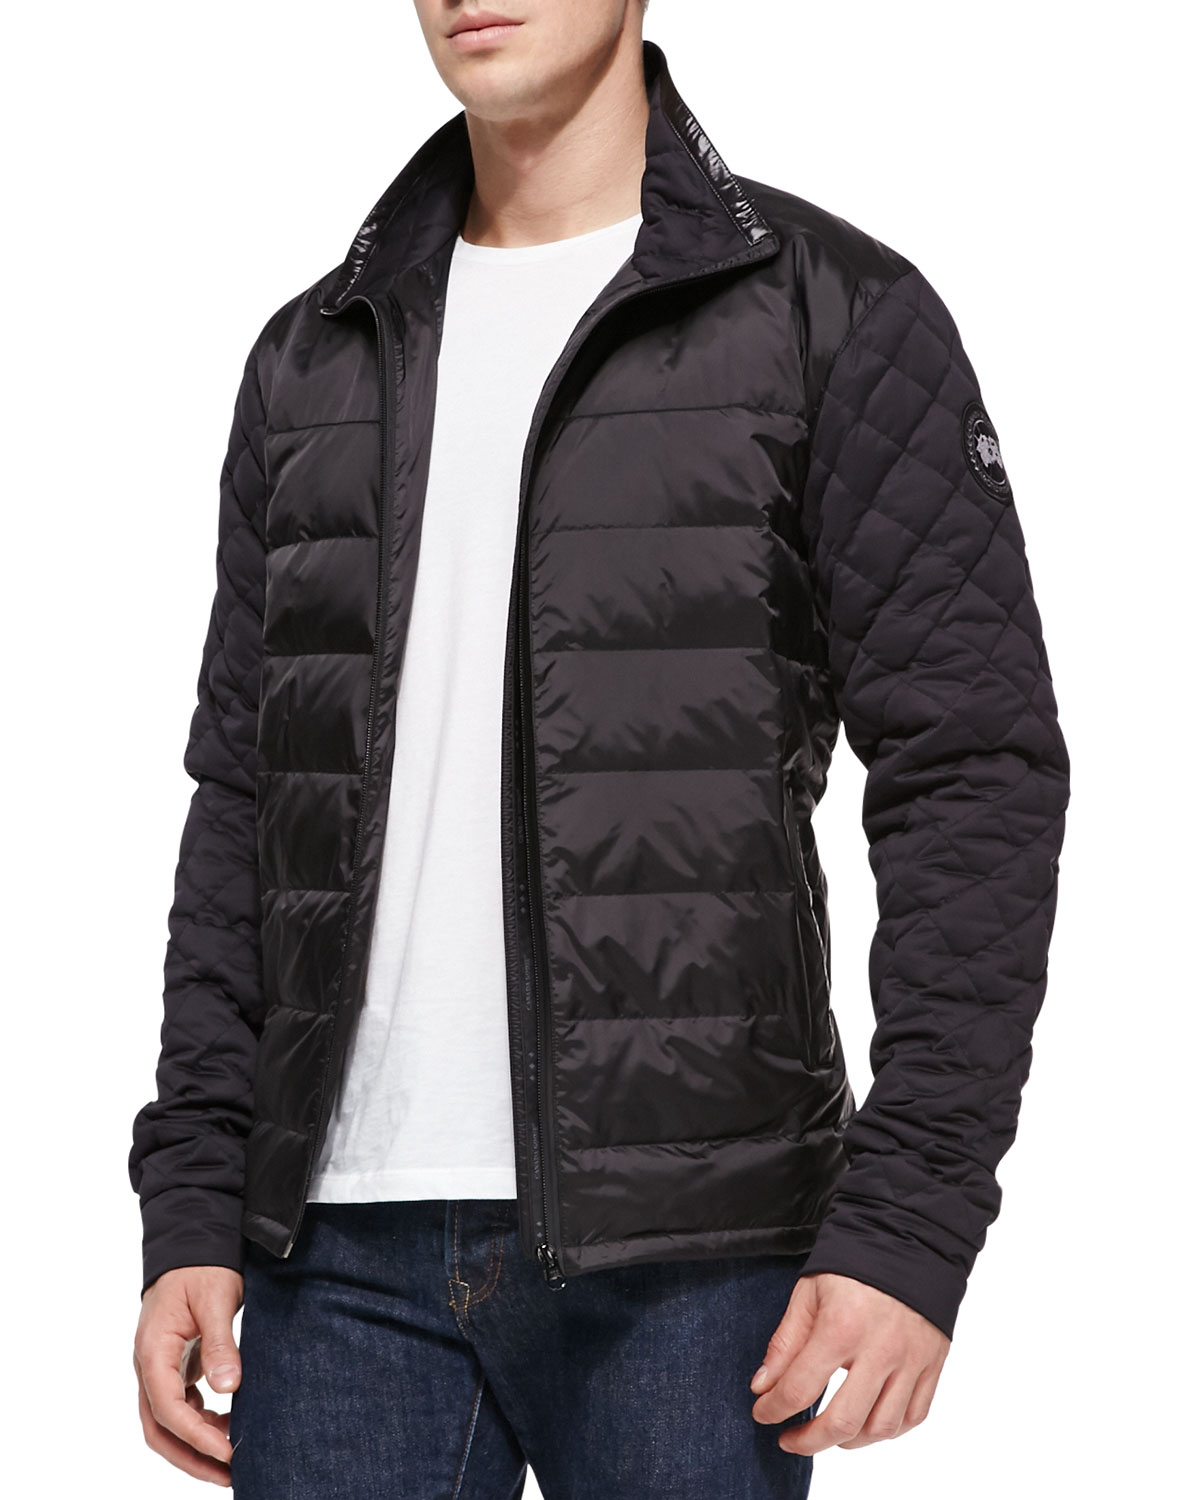 Canada Goose victoria parka outlet store - New Style Canada Goose Trillium Niagara Grape Clearance For Sale